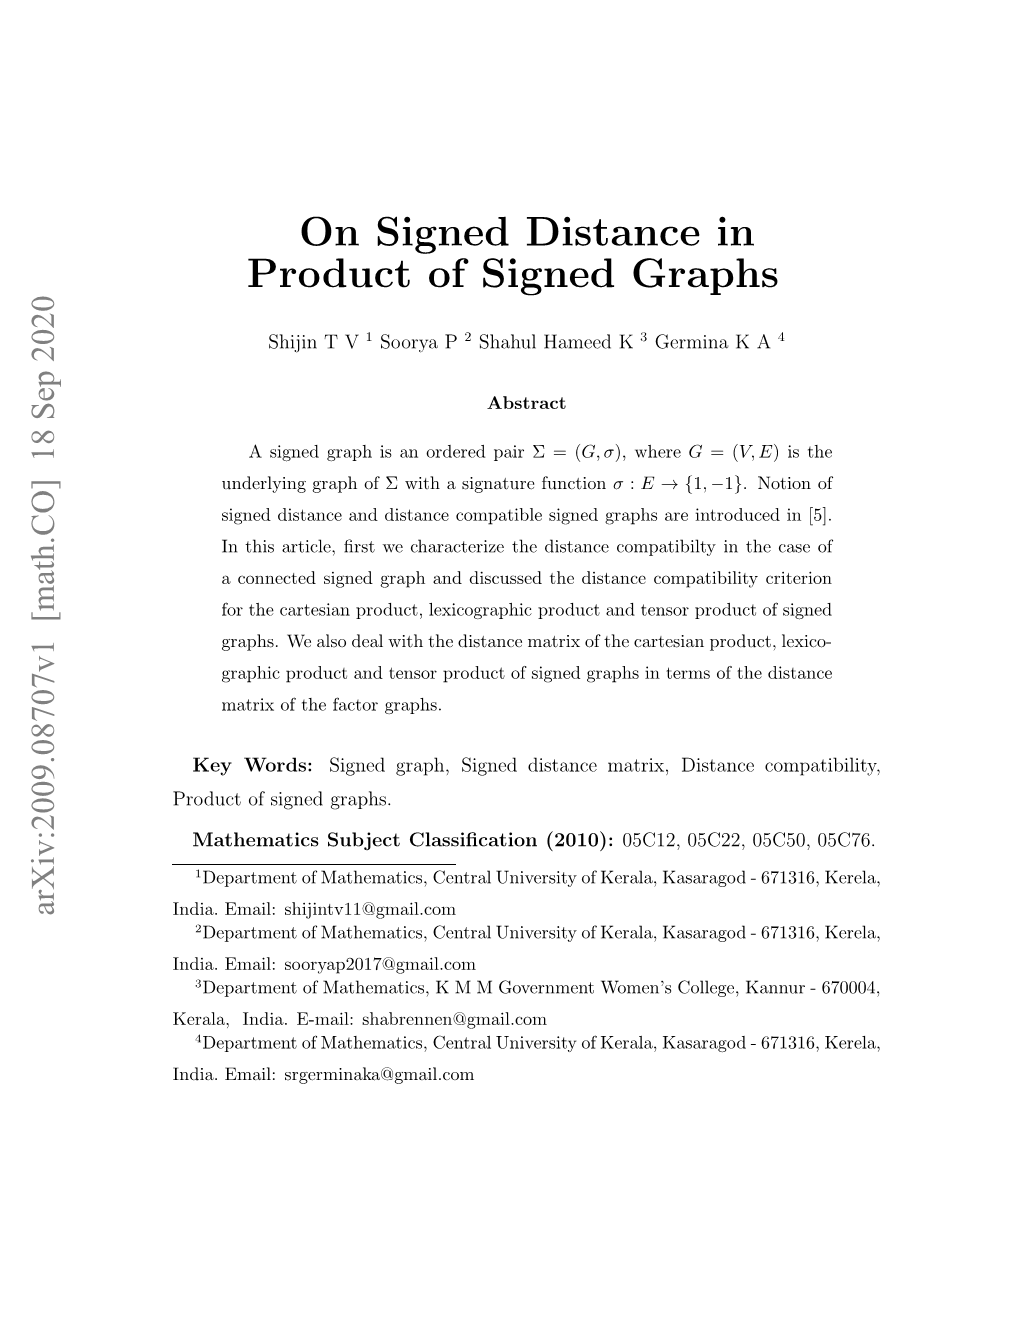 On Signed Distance in Product of Signed Graphs